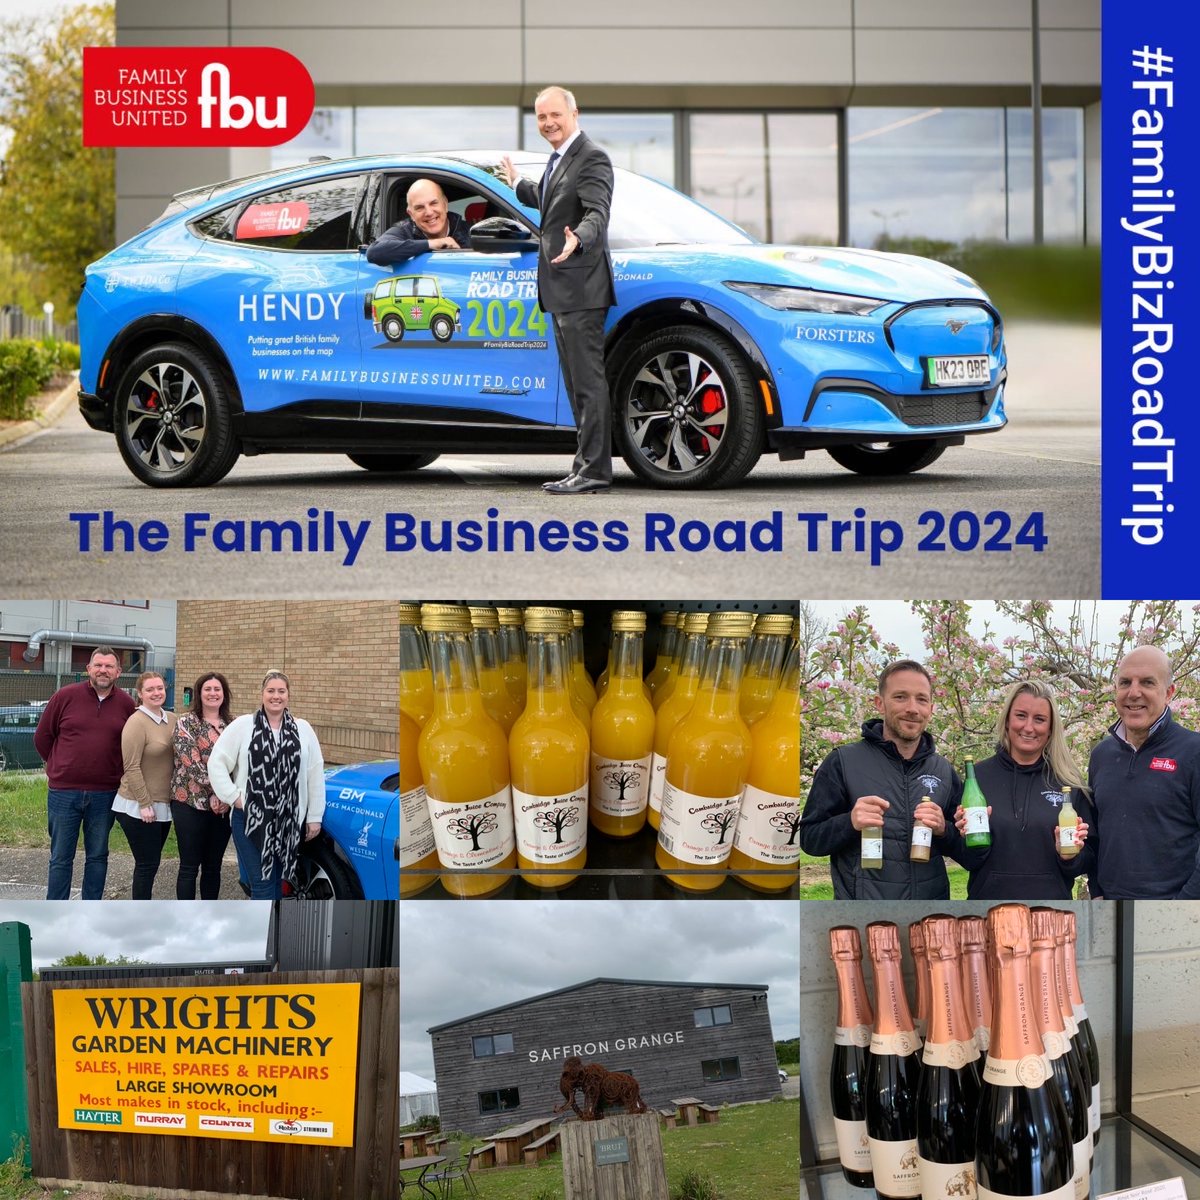 A great first day on the #FamilyBizRoadTrip in East Anglia!